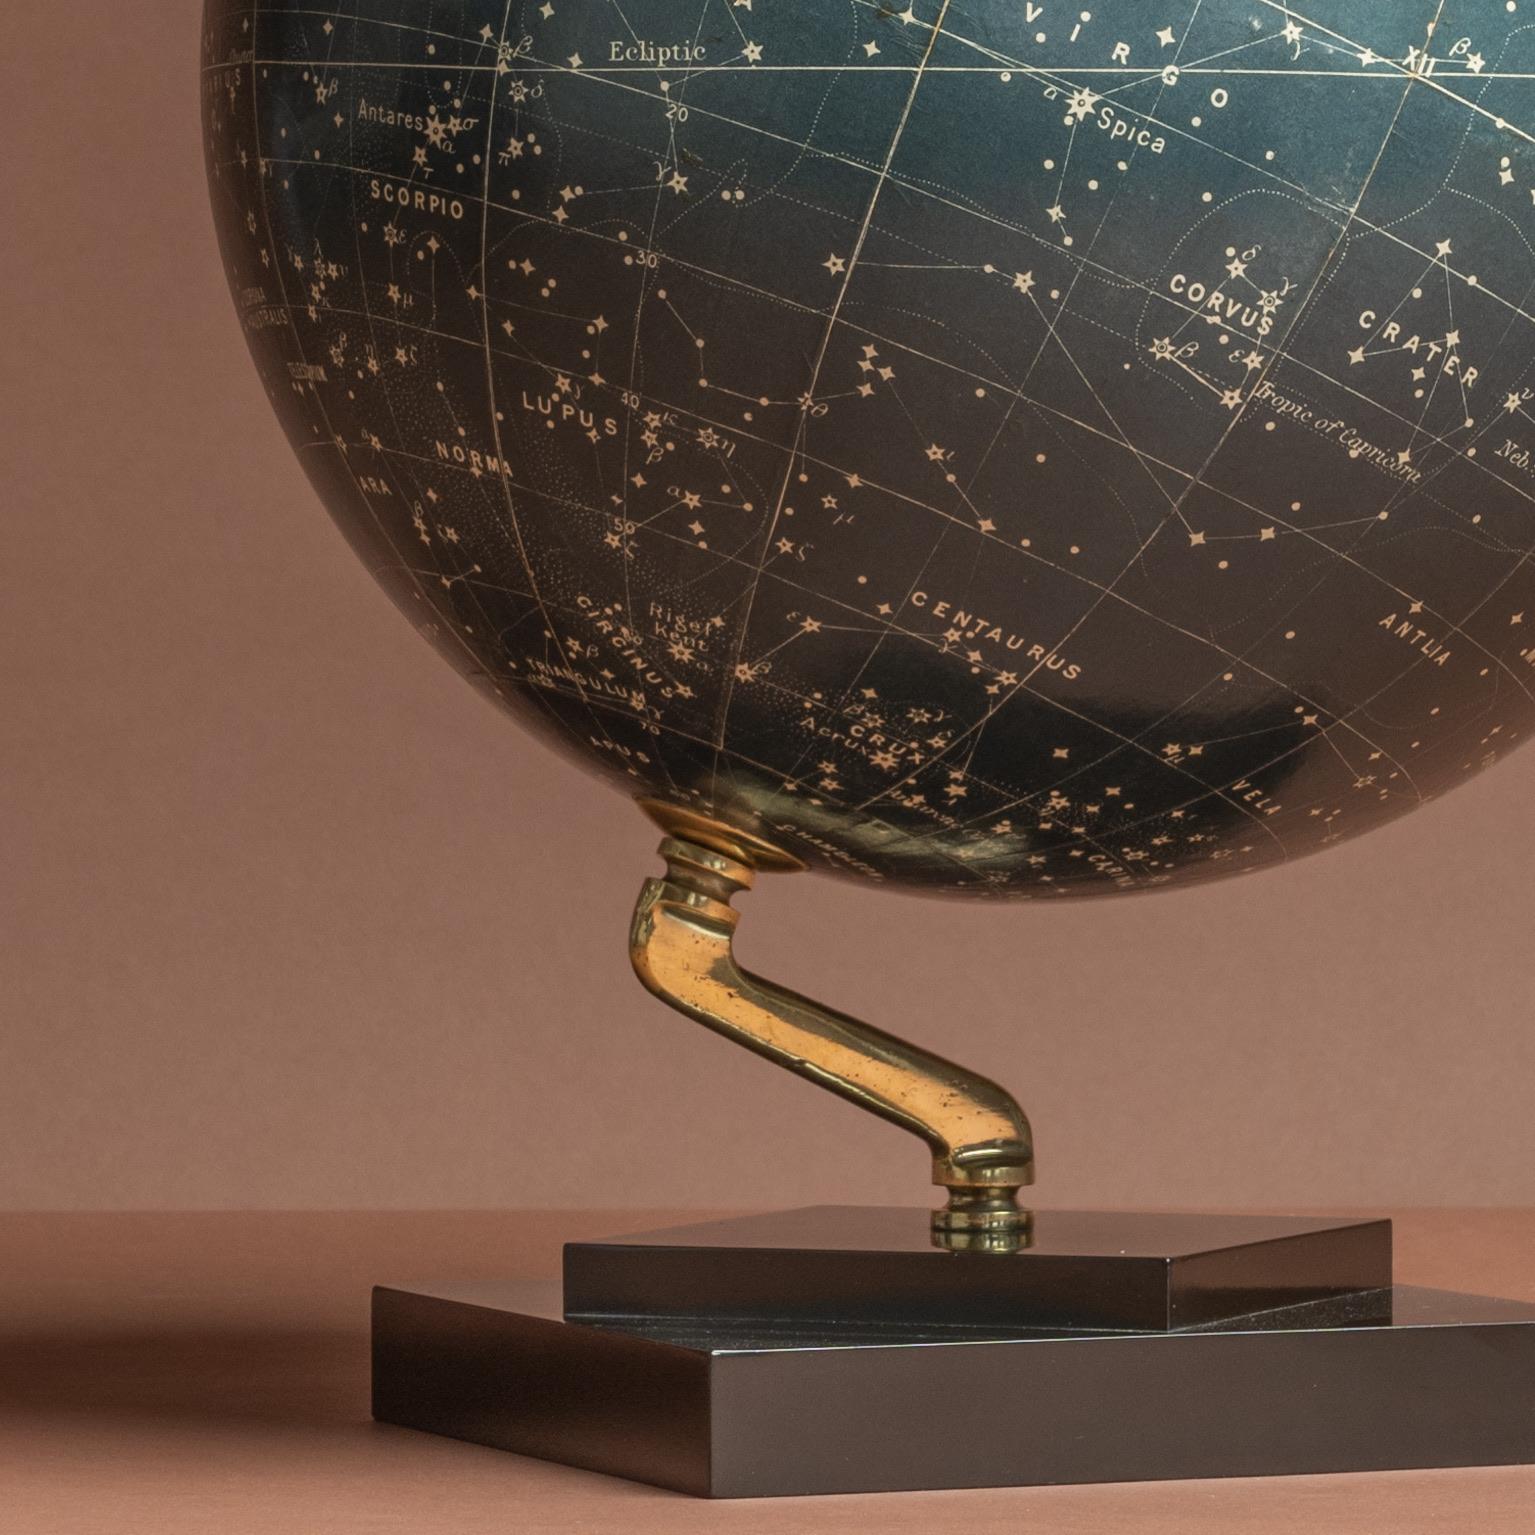 A stylish celestial globe on a brass inclined plain mount attached to original square bakelite base and secured at the top by a brass acorn finial. By George Philip and Son; circa 1935. A cartouche is present that includes the title and maker's